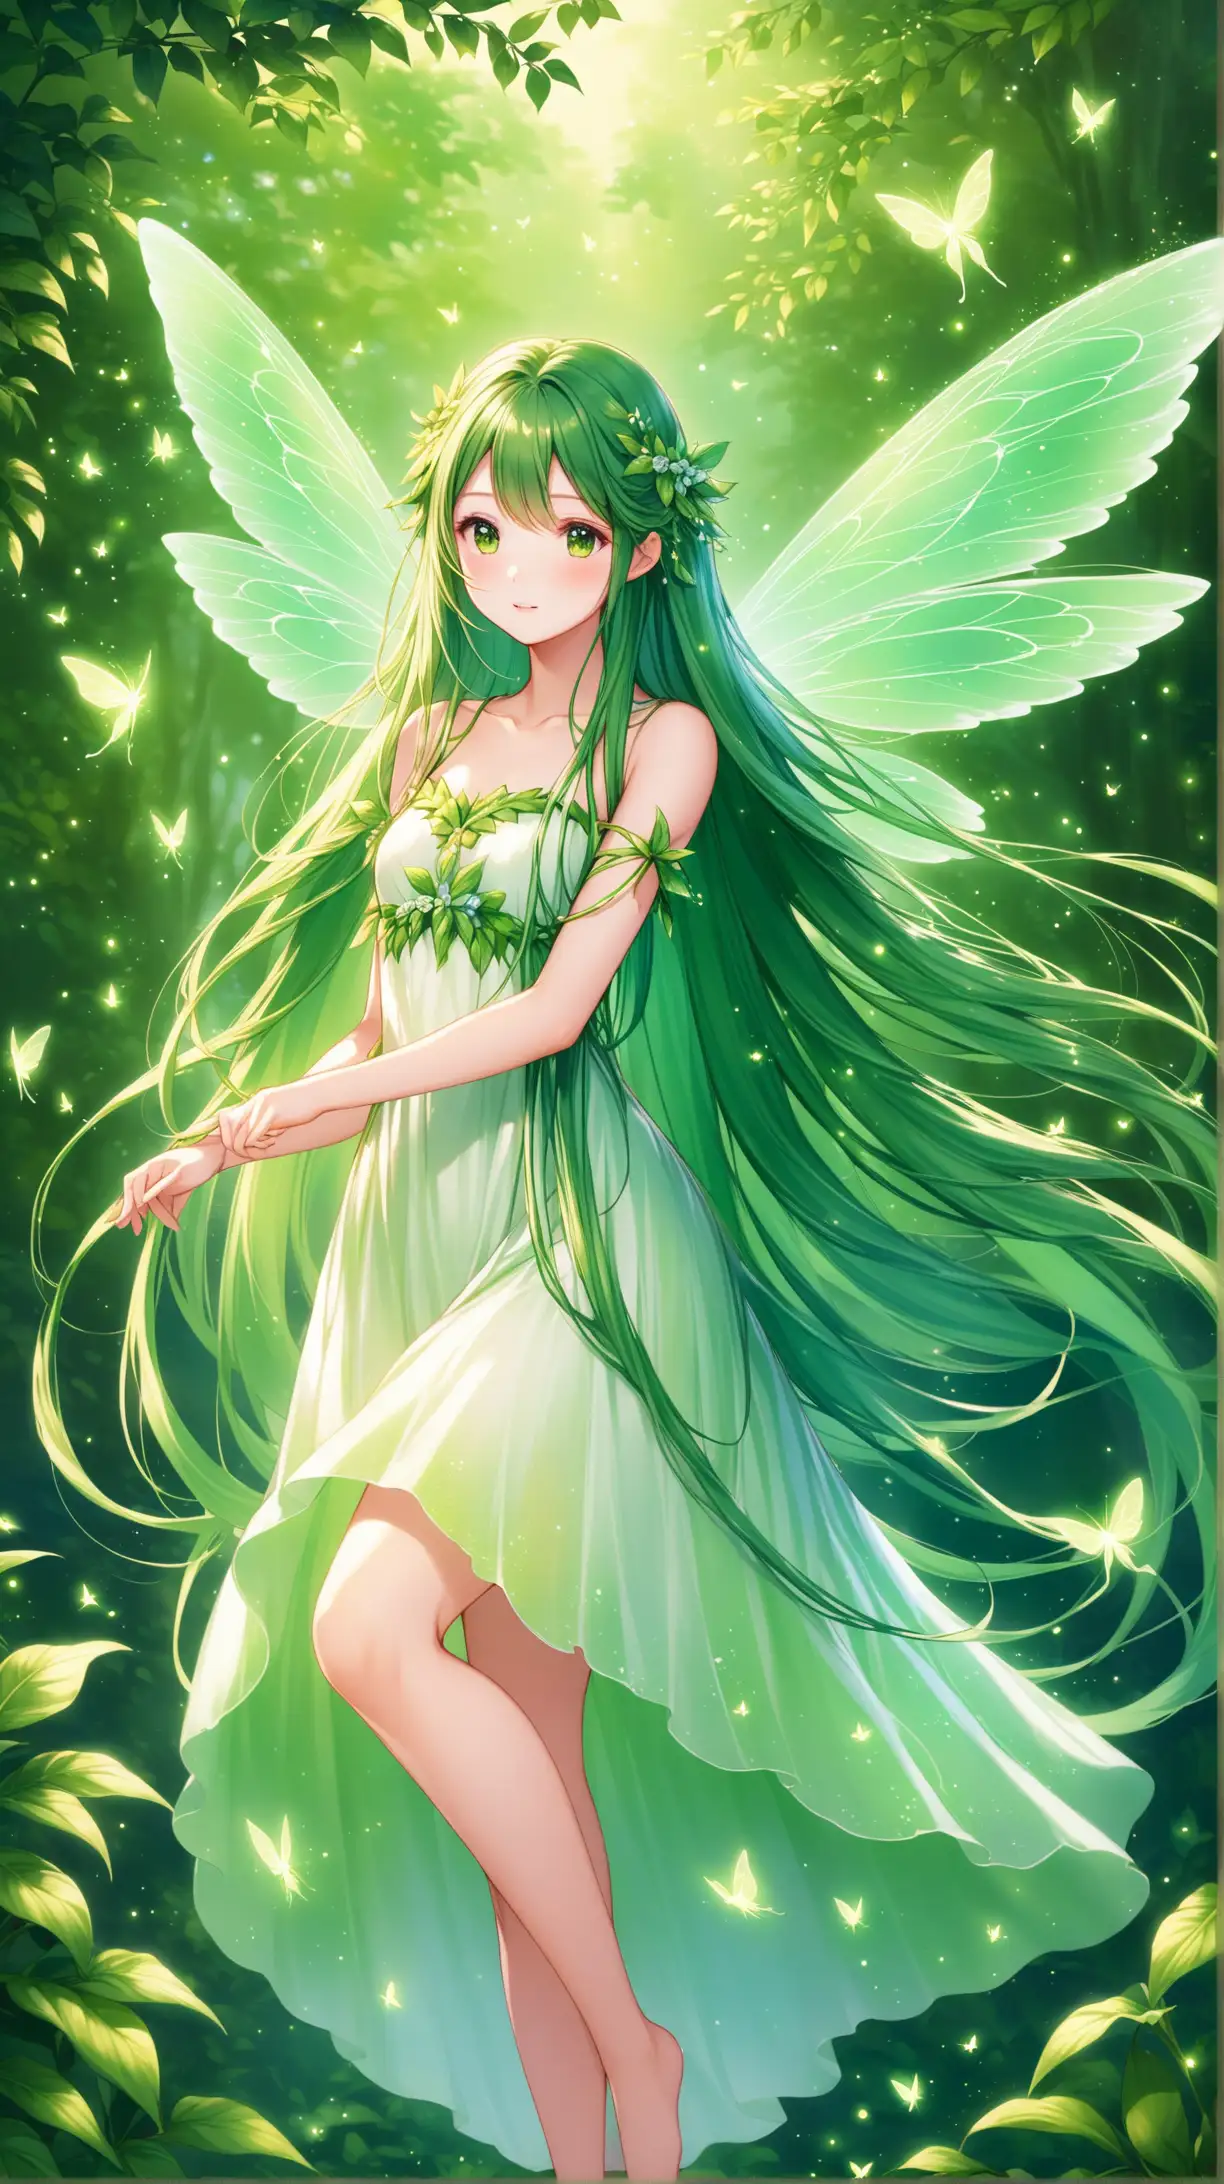 Enchanting Fairy Girl with Long Hair in a White Dress and Green Wings